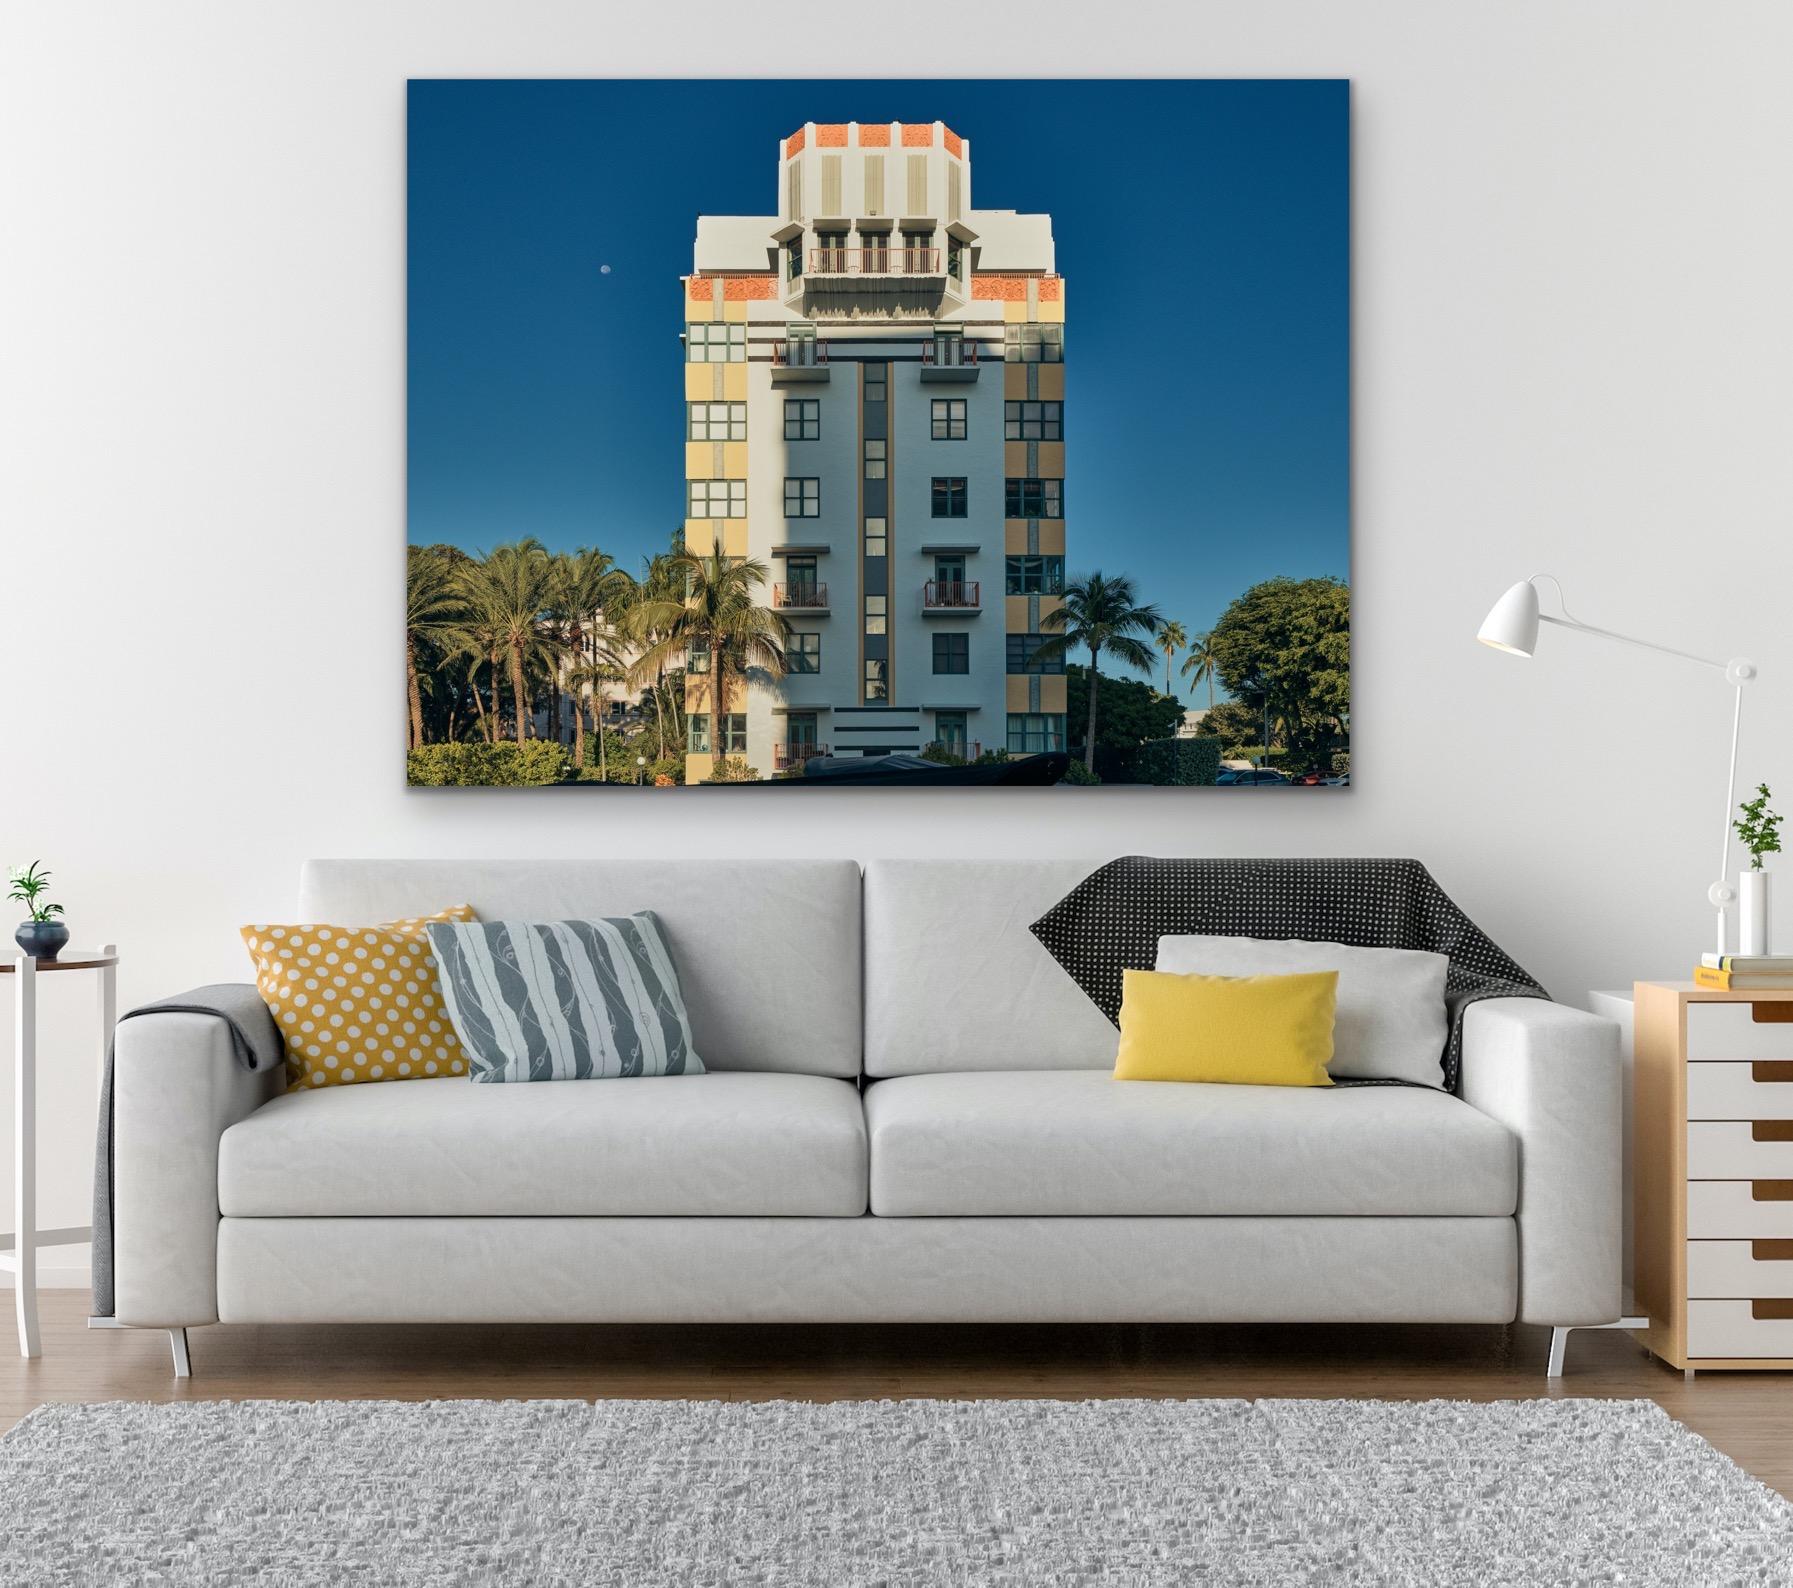 This contemporary coastal photograph by Peter Mendelson features a partially shadowed view of the Deco style Helen Mar building in Miami Beach, Florida, under a clear sky and the moon. It is surrounded by lush palm trees. 

This is a metal